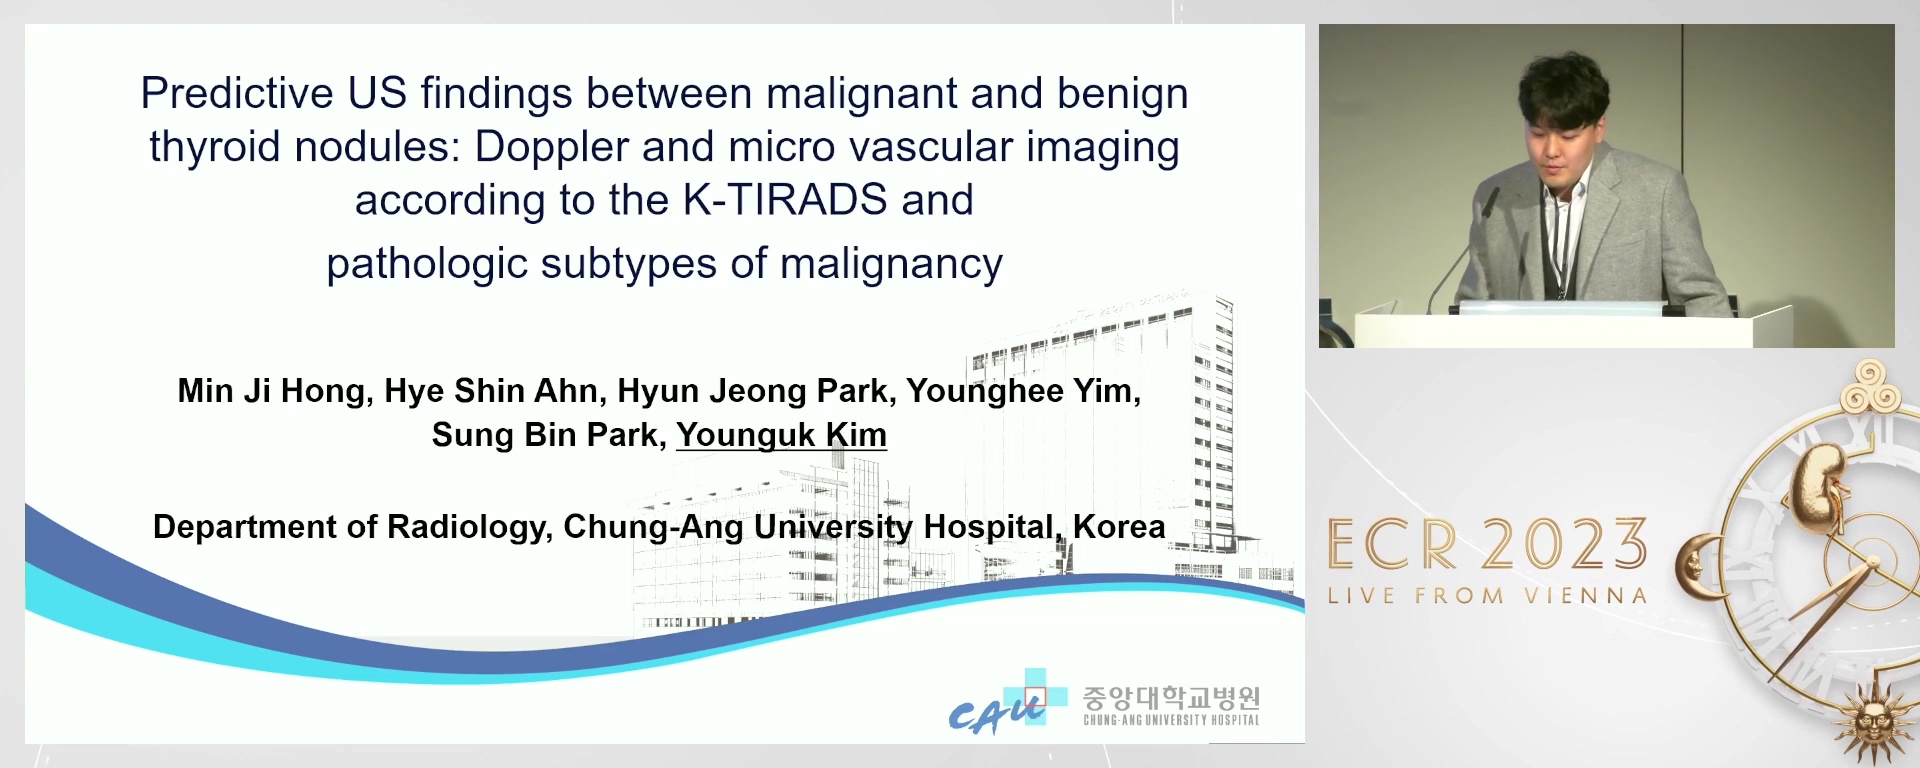 Predictive US findings between malignant and benign thyroid nodules: Doppler and microvascular imaging according to the K-TIRADS and pathological subtypes of malignancy - Younguk Kim, seoul / KR